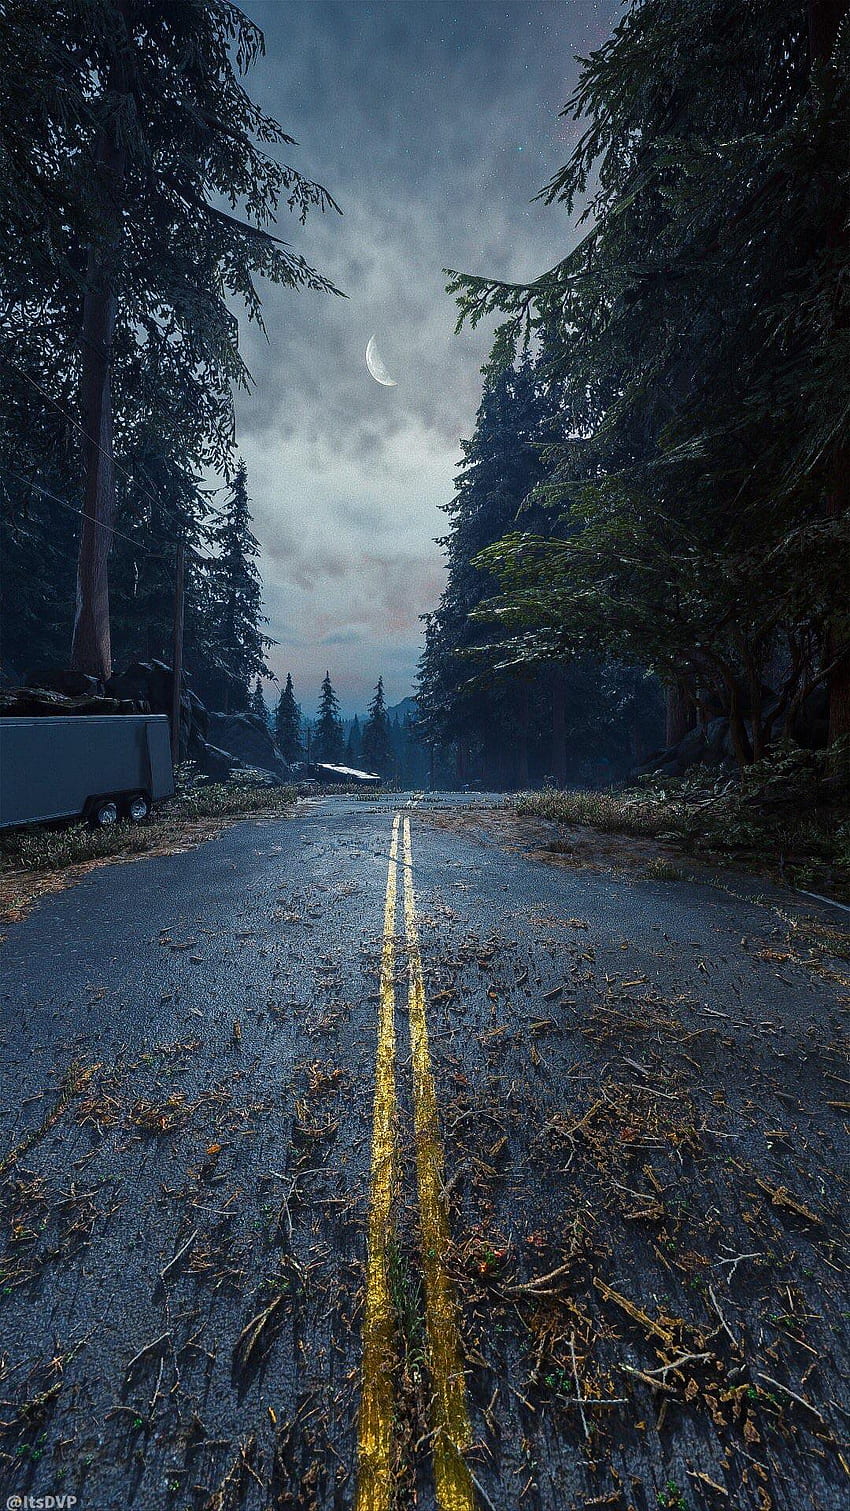 Not my (cred in bottom left) but my Days Gone HD phone wallpaper